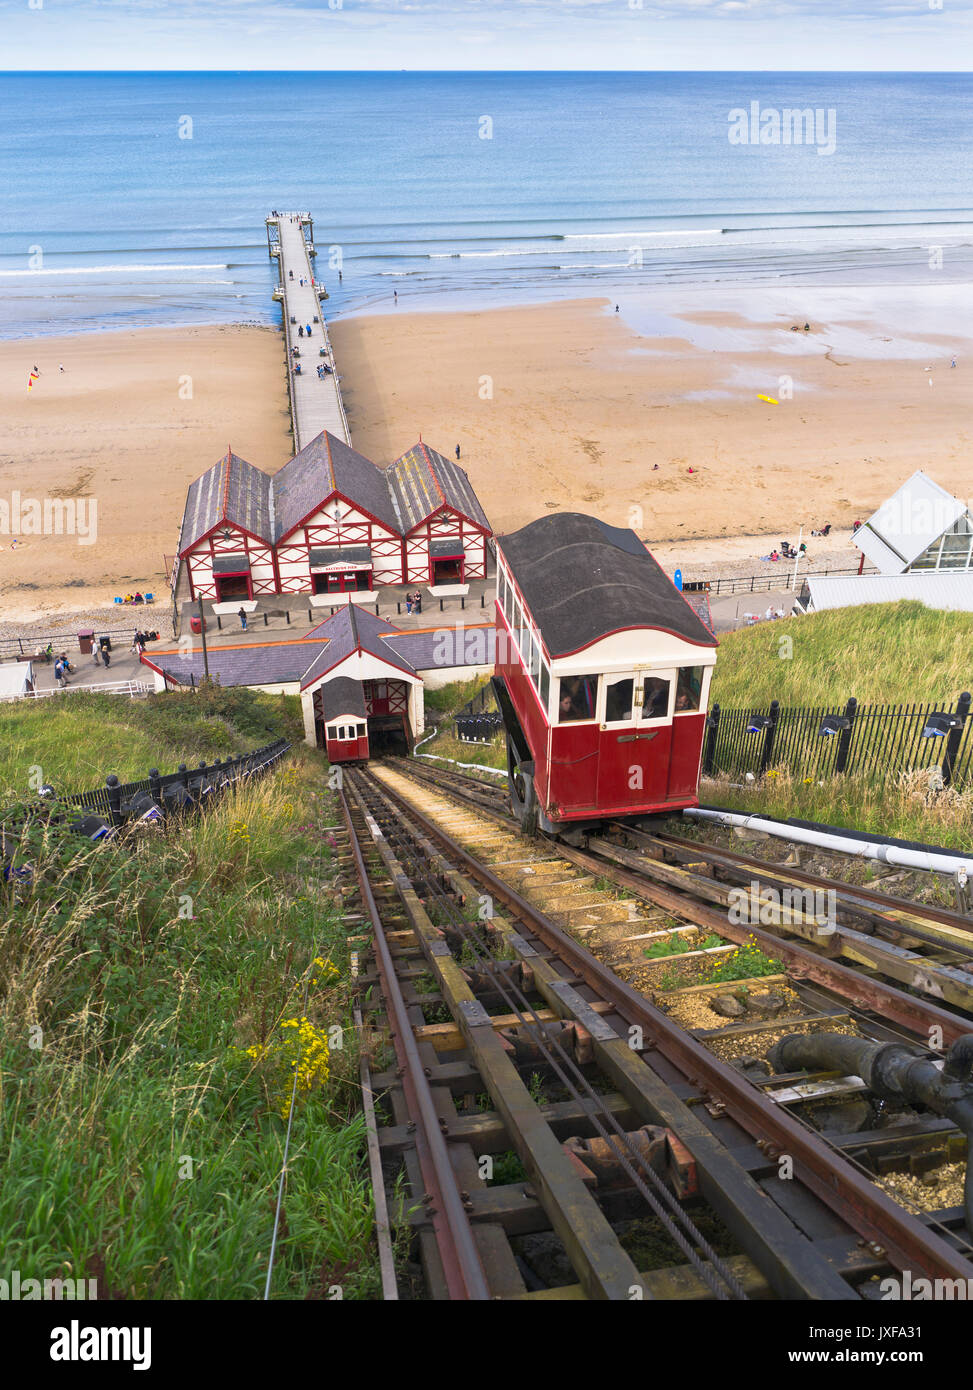 dh Saltburn Beach SALTBURN BY THE SEA CLEVELAND Saltburn Cliff Lift Beach seacliff Pier tramway funiculaire Banque D'Images